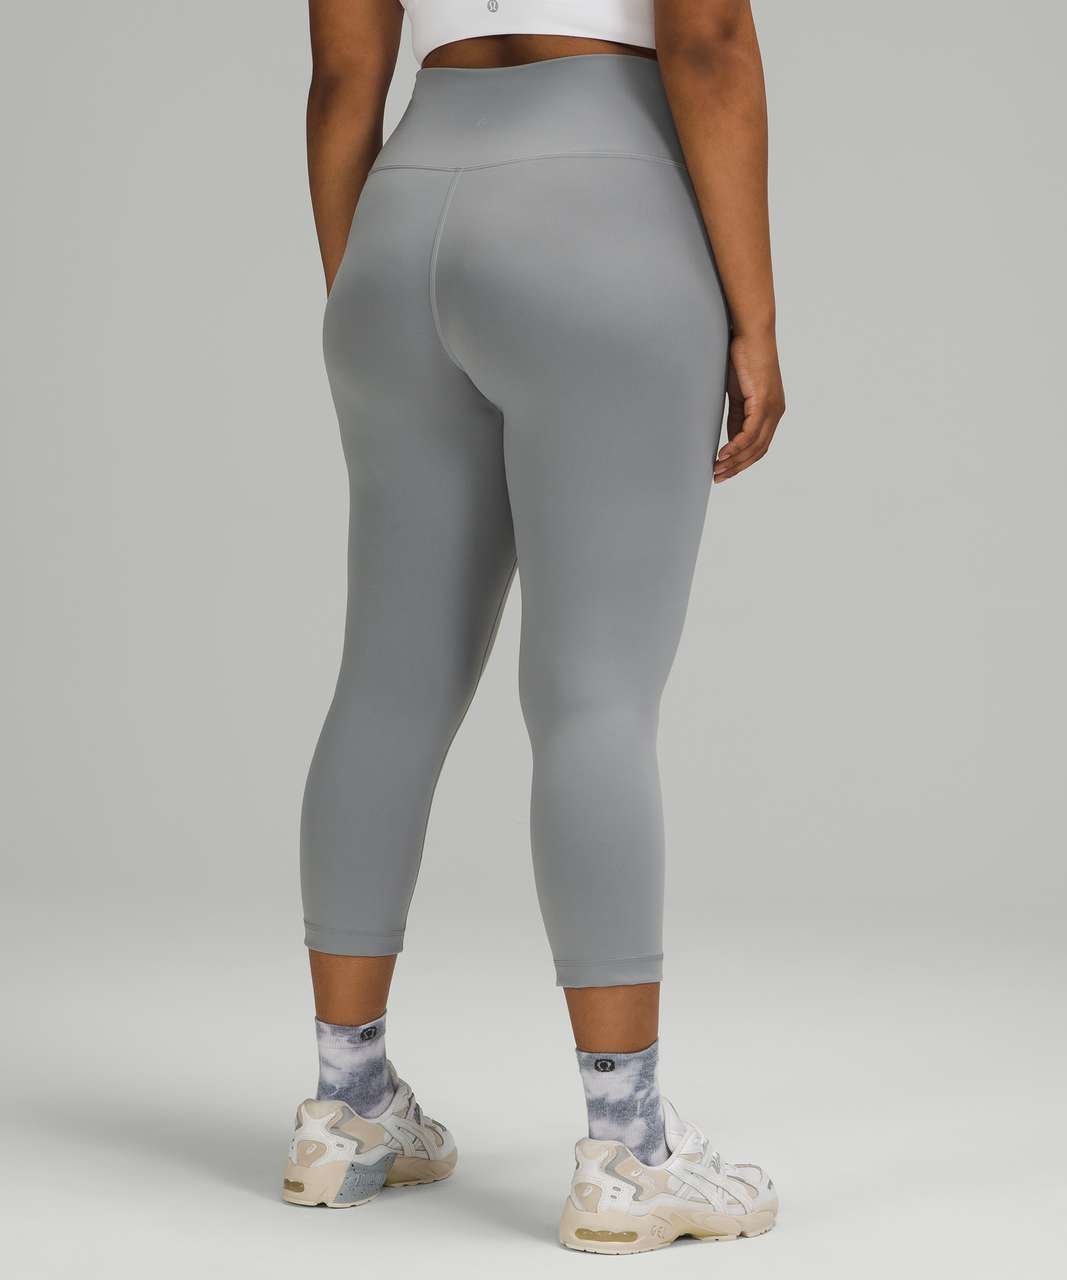 Wunder train high-rise tight 24” size S in Rhino Grey, Women's Fashion,  Activewear on Carousell